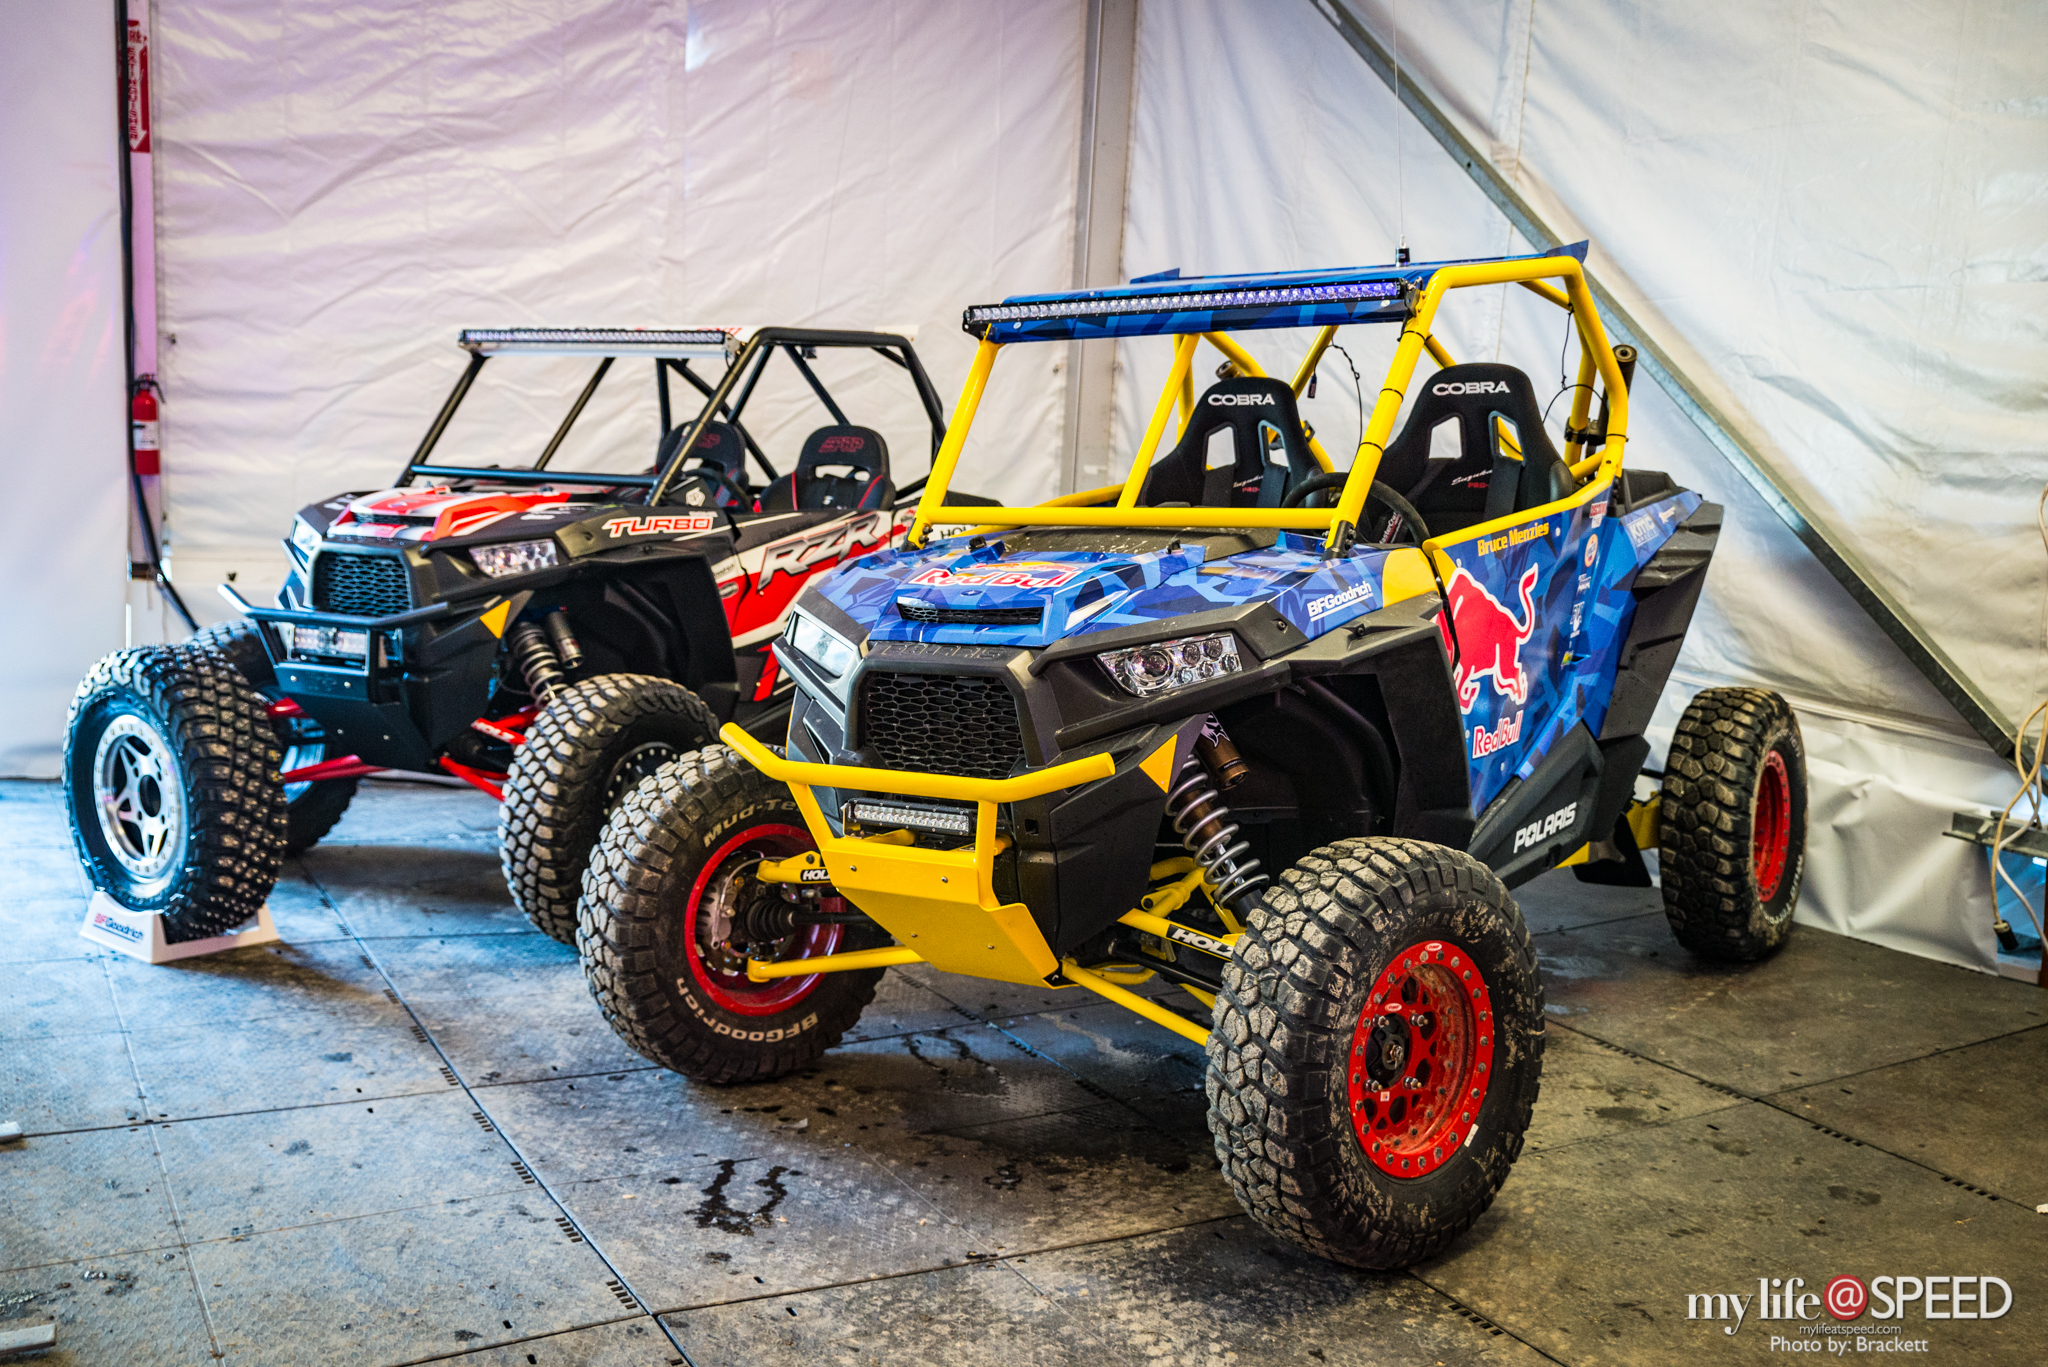 Bryce Menzies was on course in the Polaris RZR with RJ Anderson for an exhibition show on Thursday